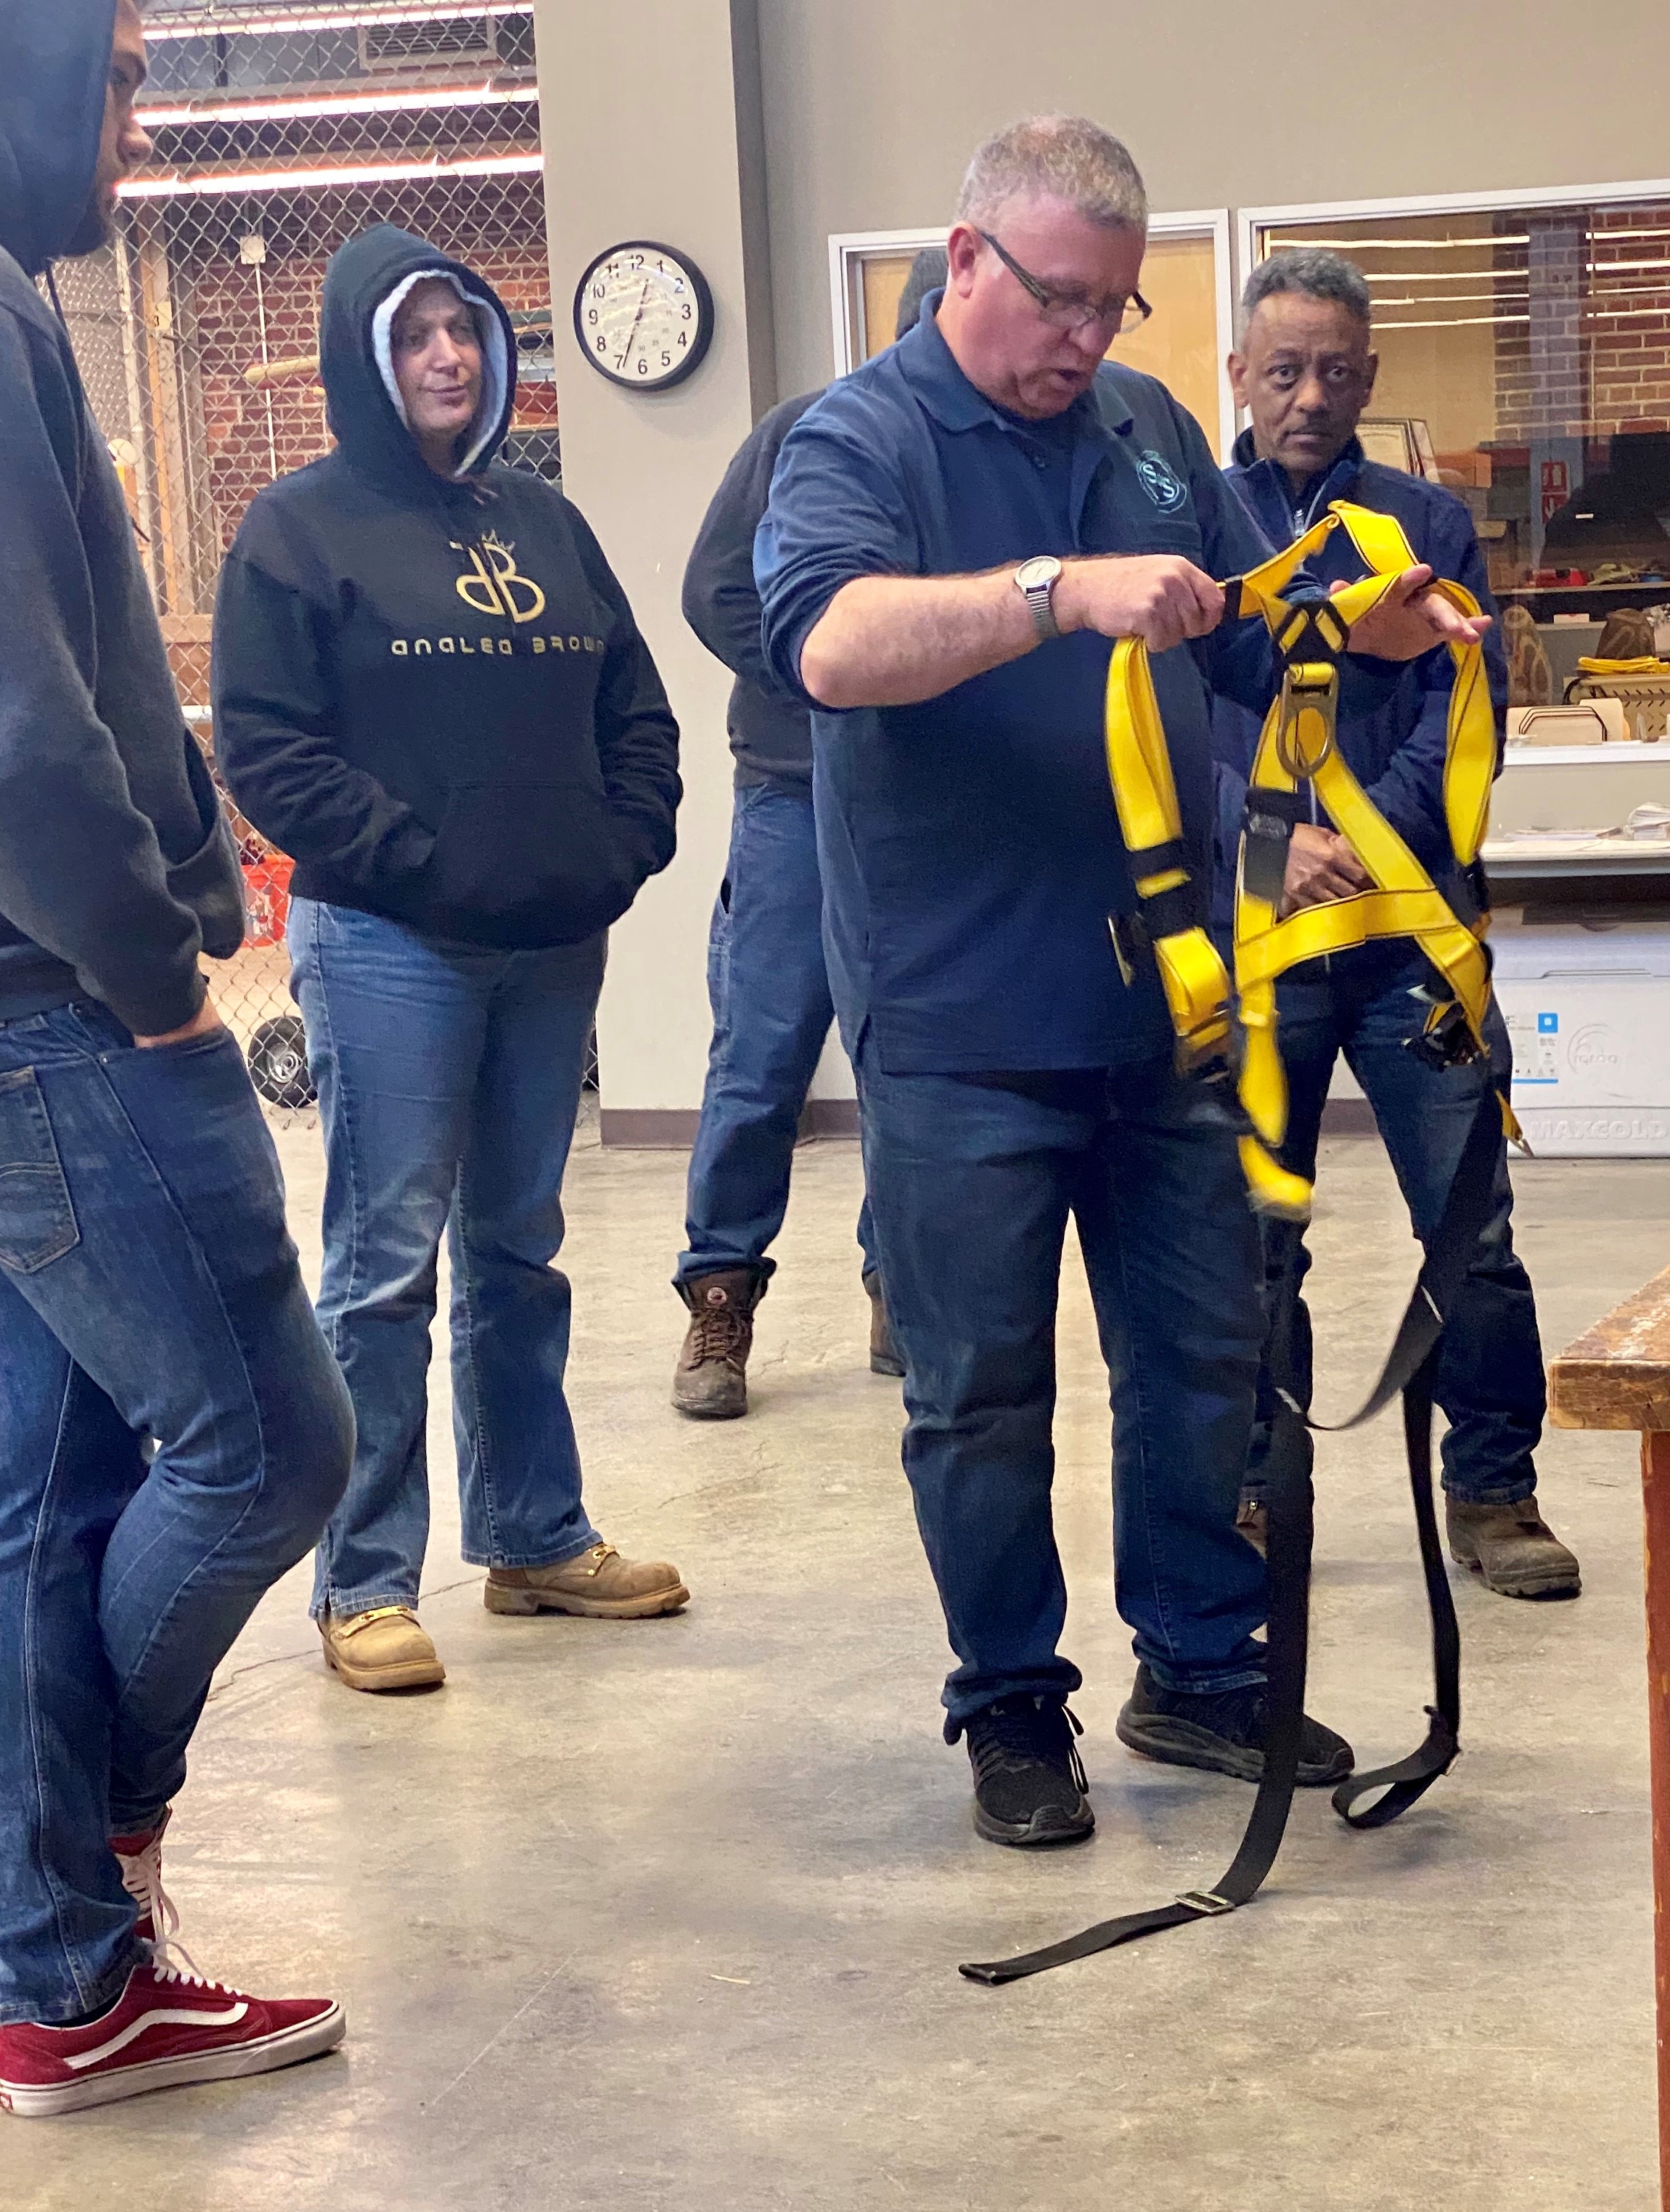 Pre-Apprenticeship and Construction Education (PACE) Instructor Ron Schuetz teaches students appropriate construction equipment. (Photo courtesy of Terumi Capeling, University of Washington, Western Region Universities Consortium).